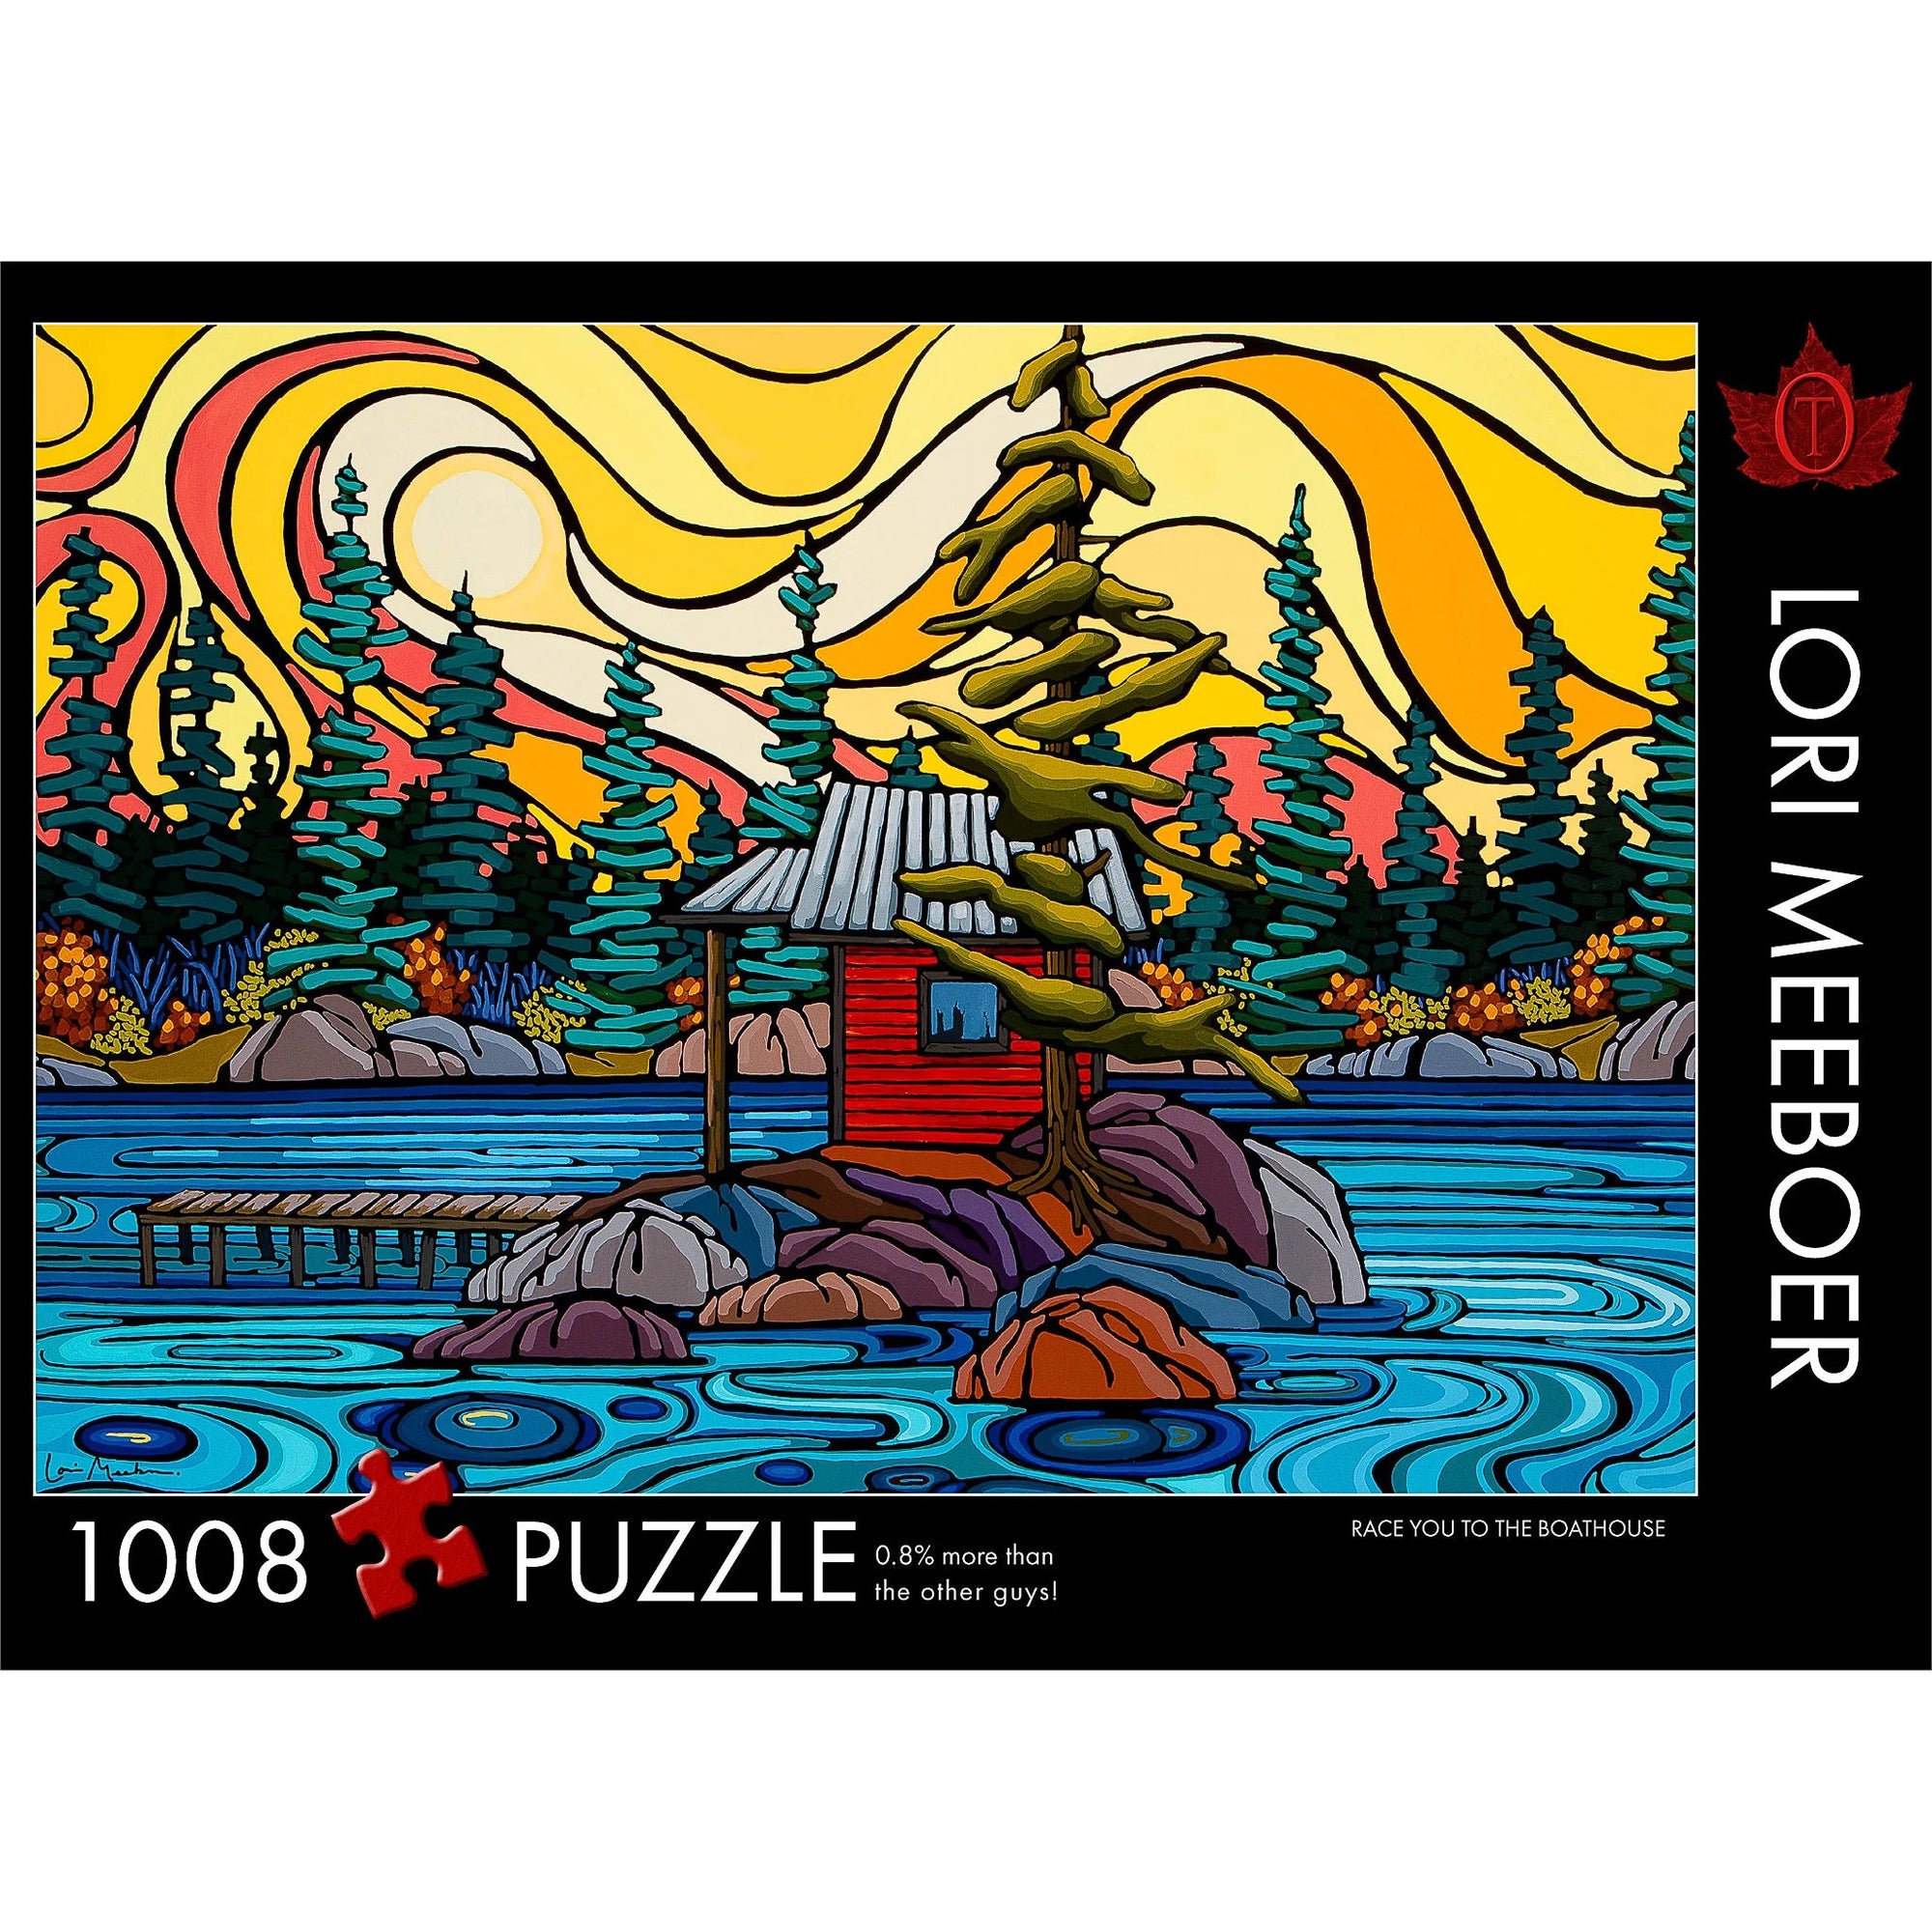 RACE YOU TO THE BOATHOUSE PUZZLE - 1008 PIECES